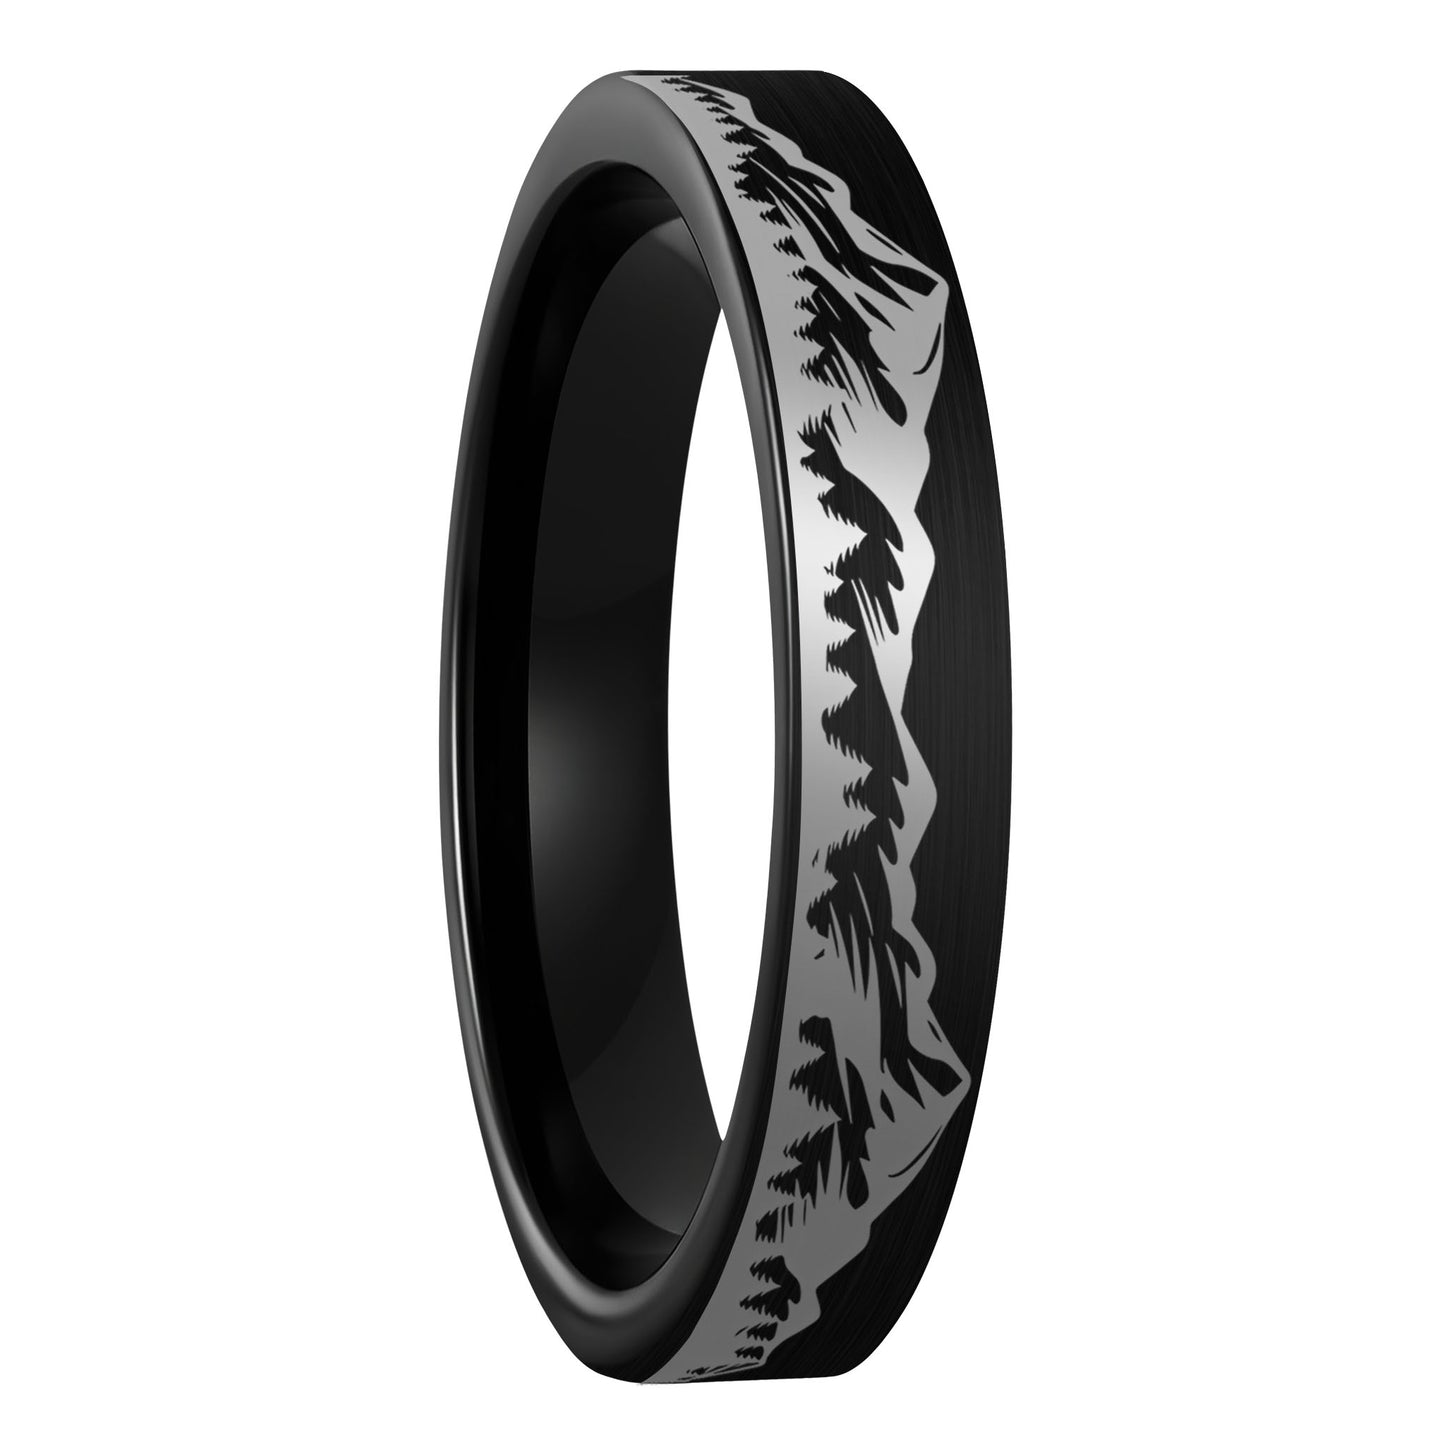 A mountain range forest brushed black tungsten women's wedding band displayed on a plain white background.